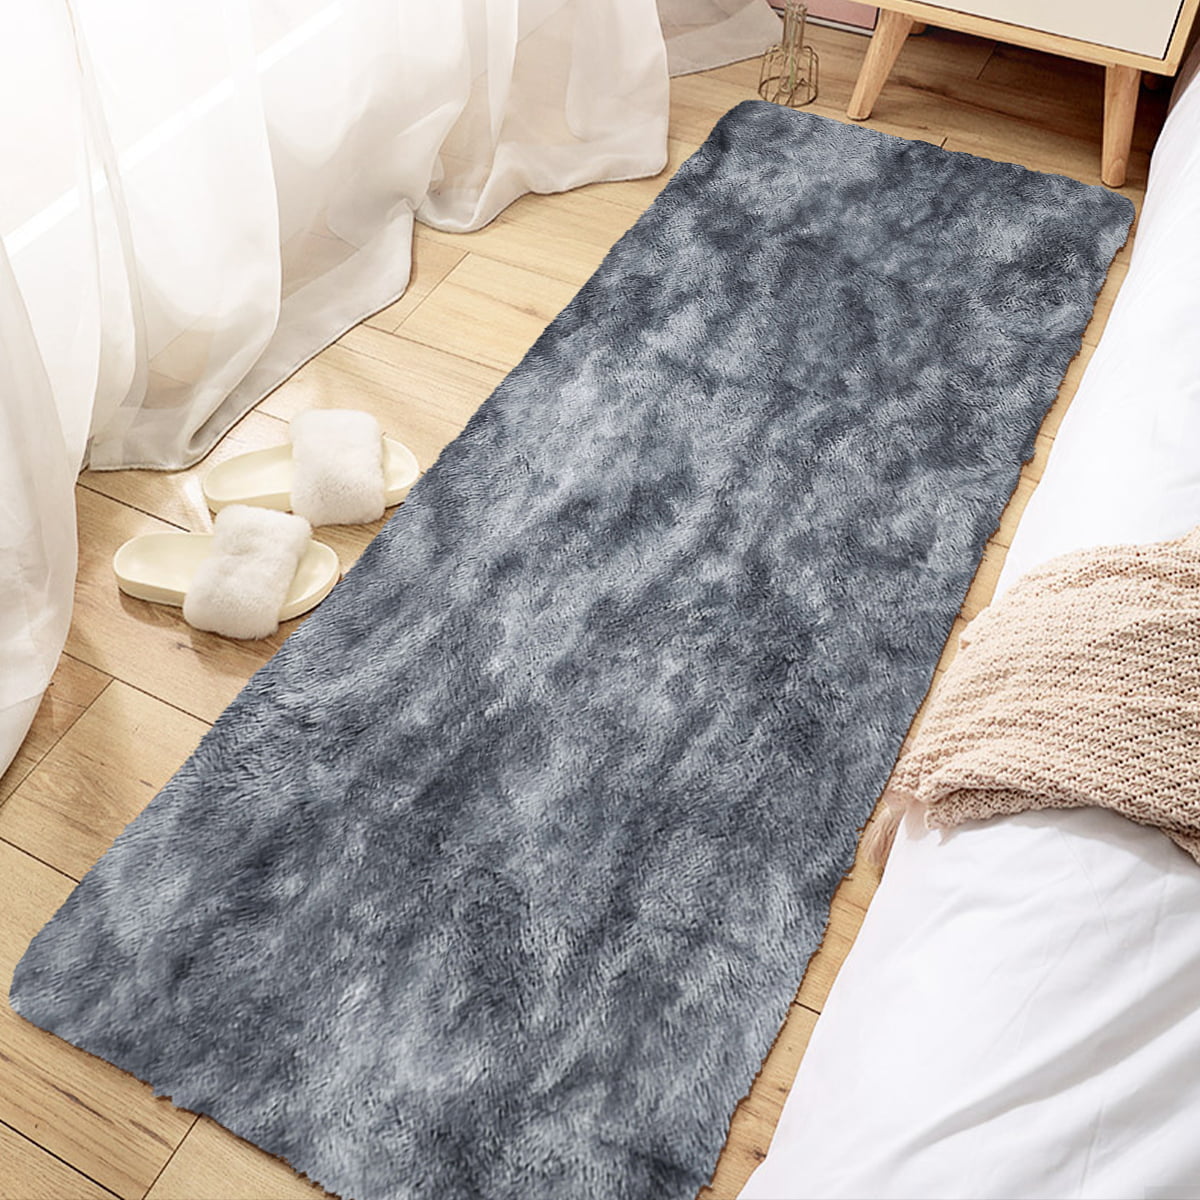 FLUFFY CHEAP SOFT RUNNER SHAGGY 'NARIN BLACK' HIGH QUALITY nice in touch CARPETS 